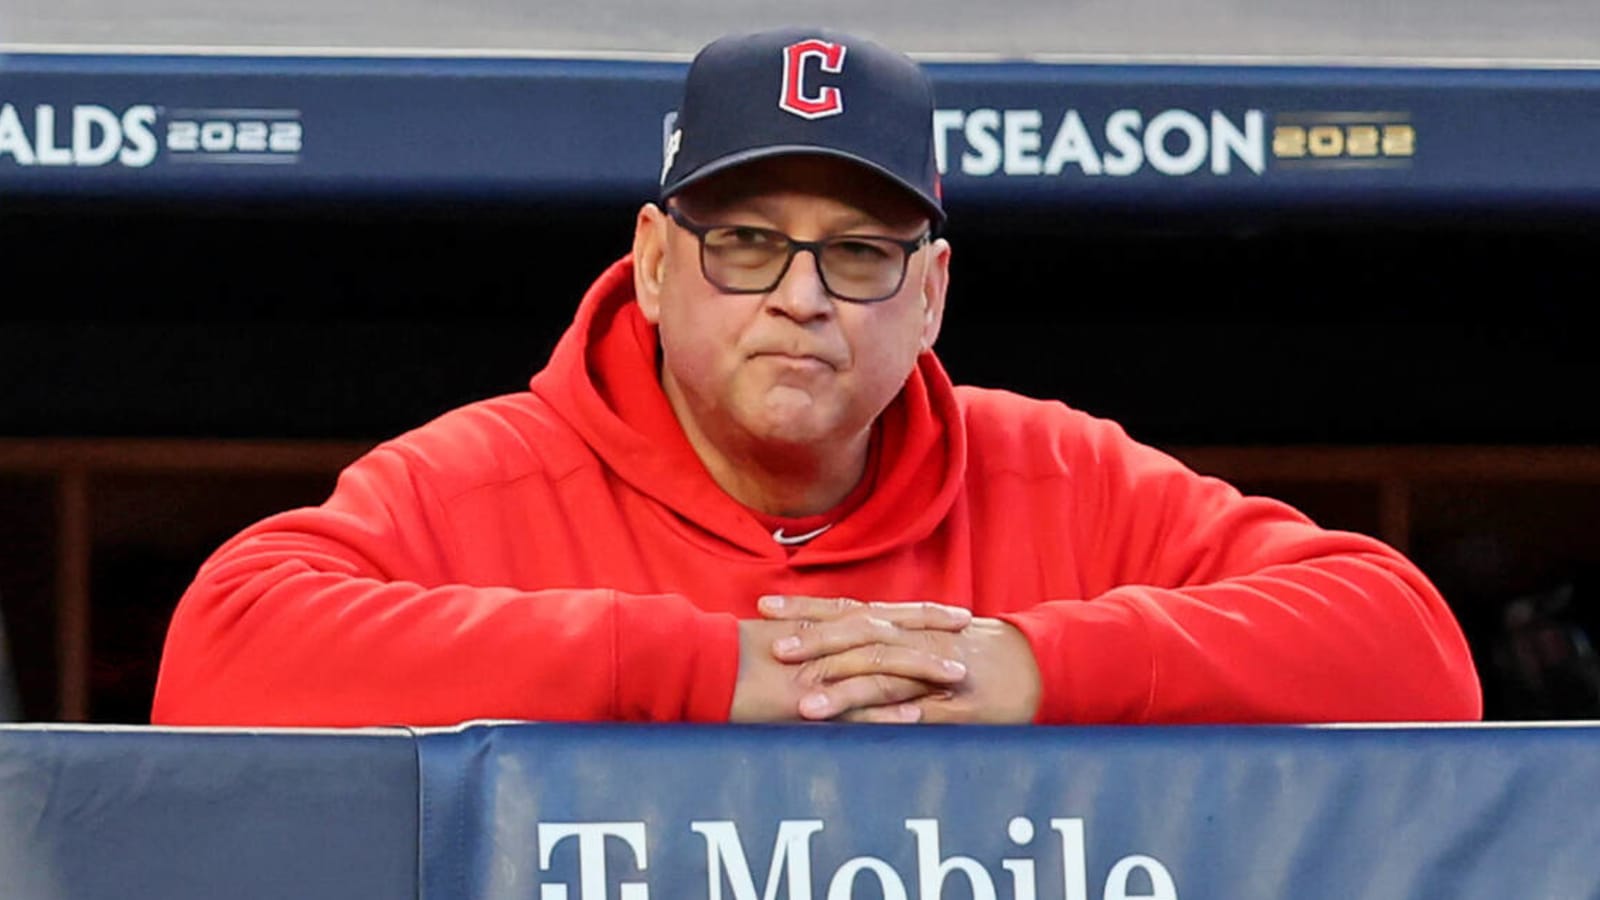 Guardians manager Terry Francona prefers a quiet exit instead of a